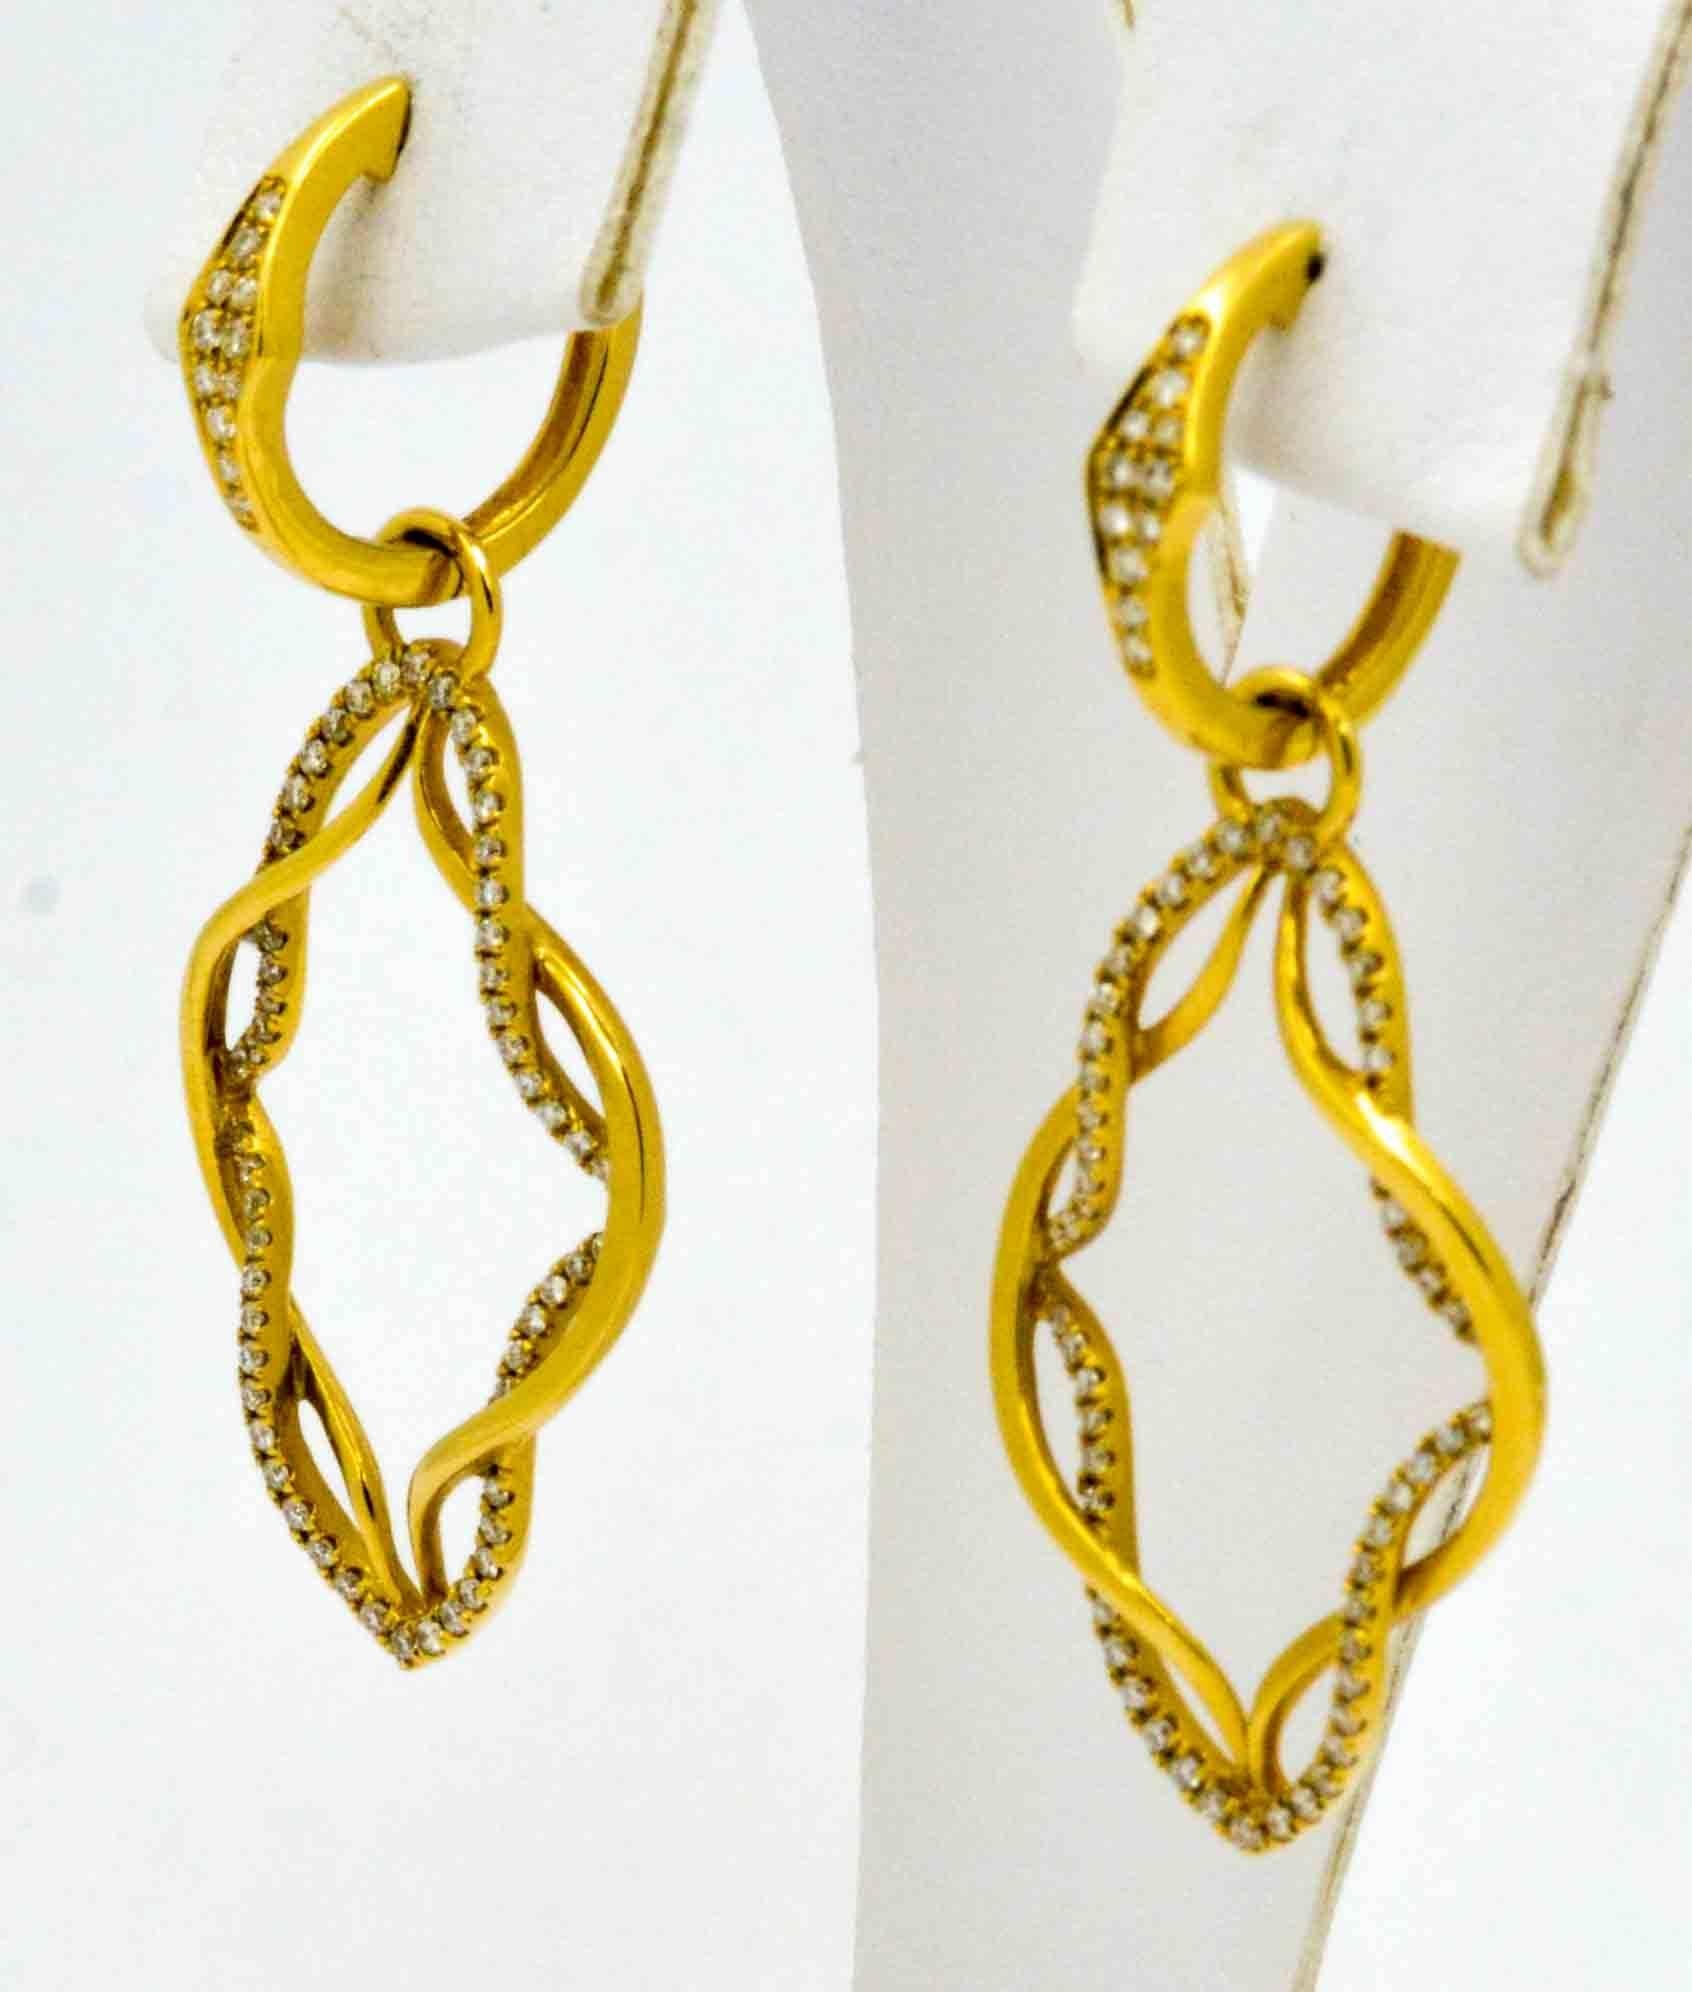 Dazzle your way from day to evening in these spectacular, light catching Katie Decker earrings crafted in a very attractive ribbon like frame suspended from a pair of hinged hoops.  The 18K yellow gold frame and earrings are set with round brilliant